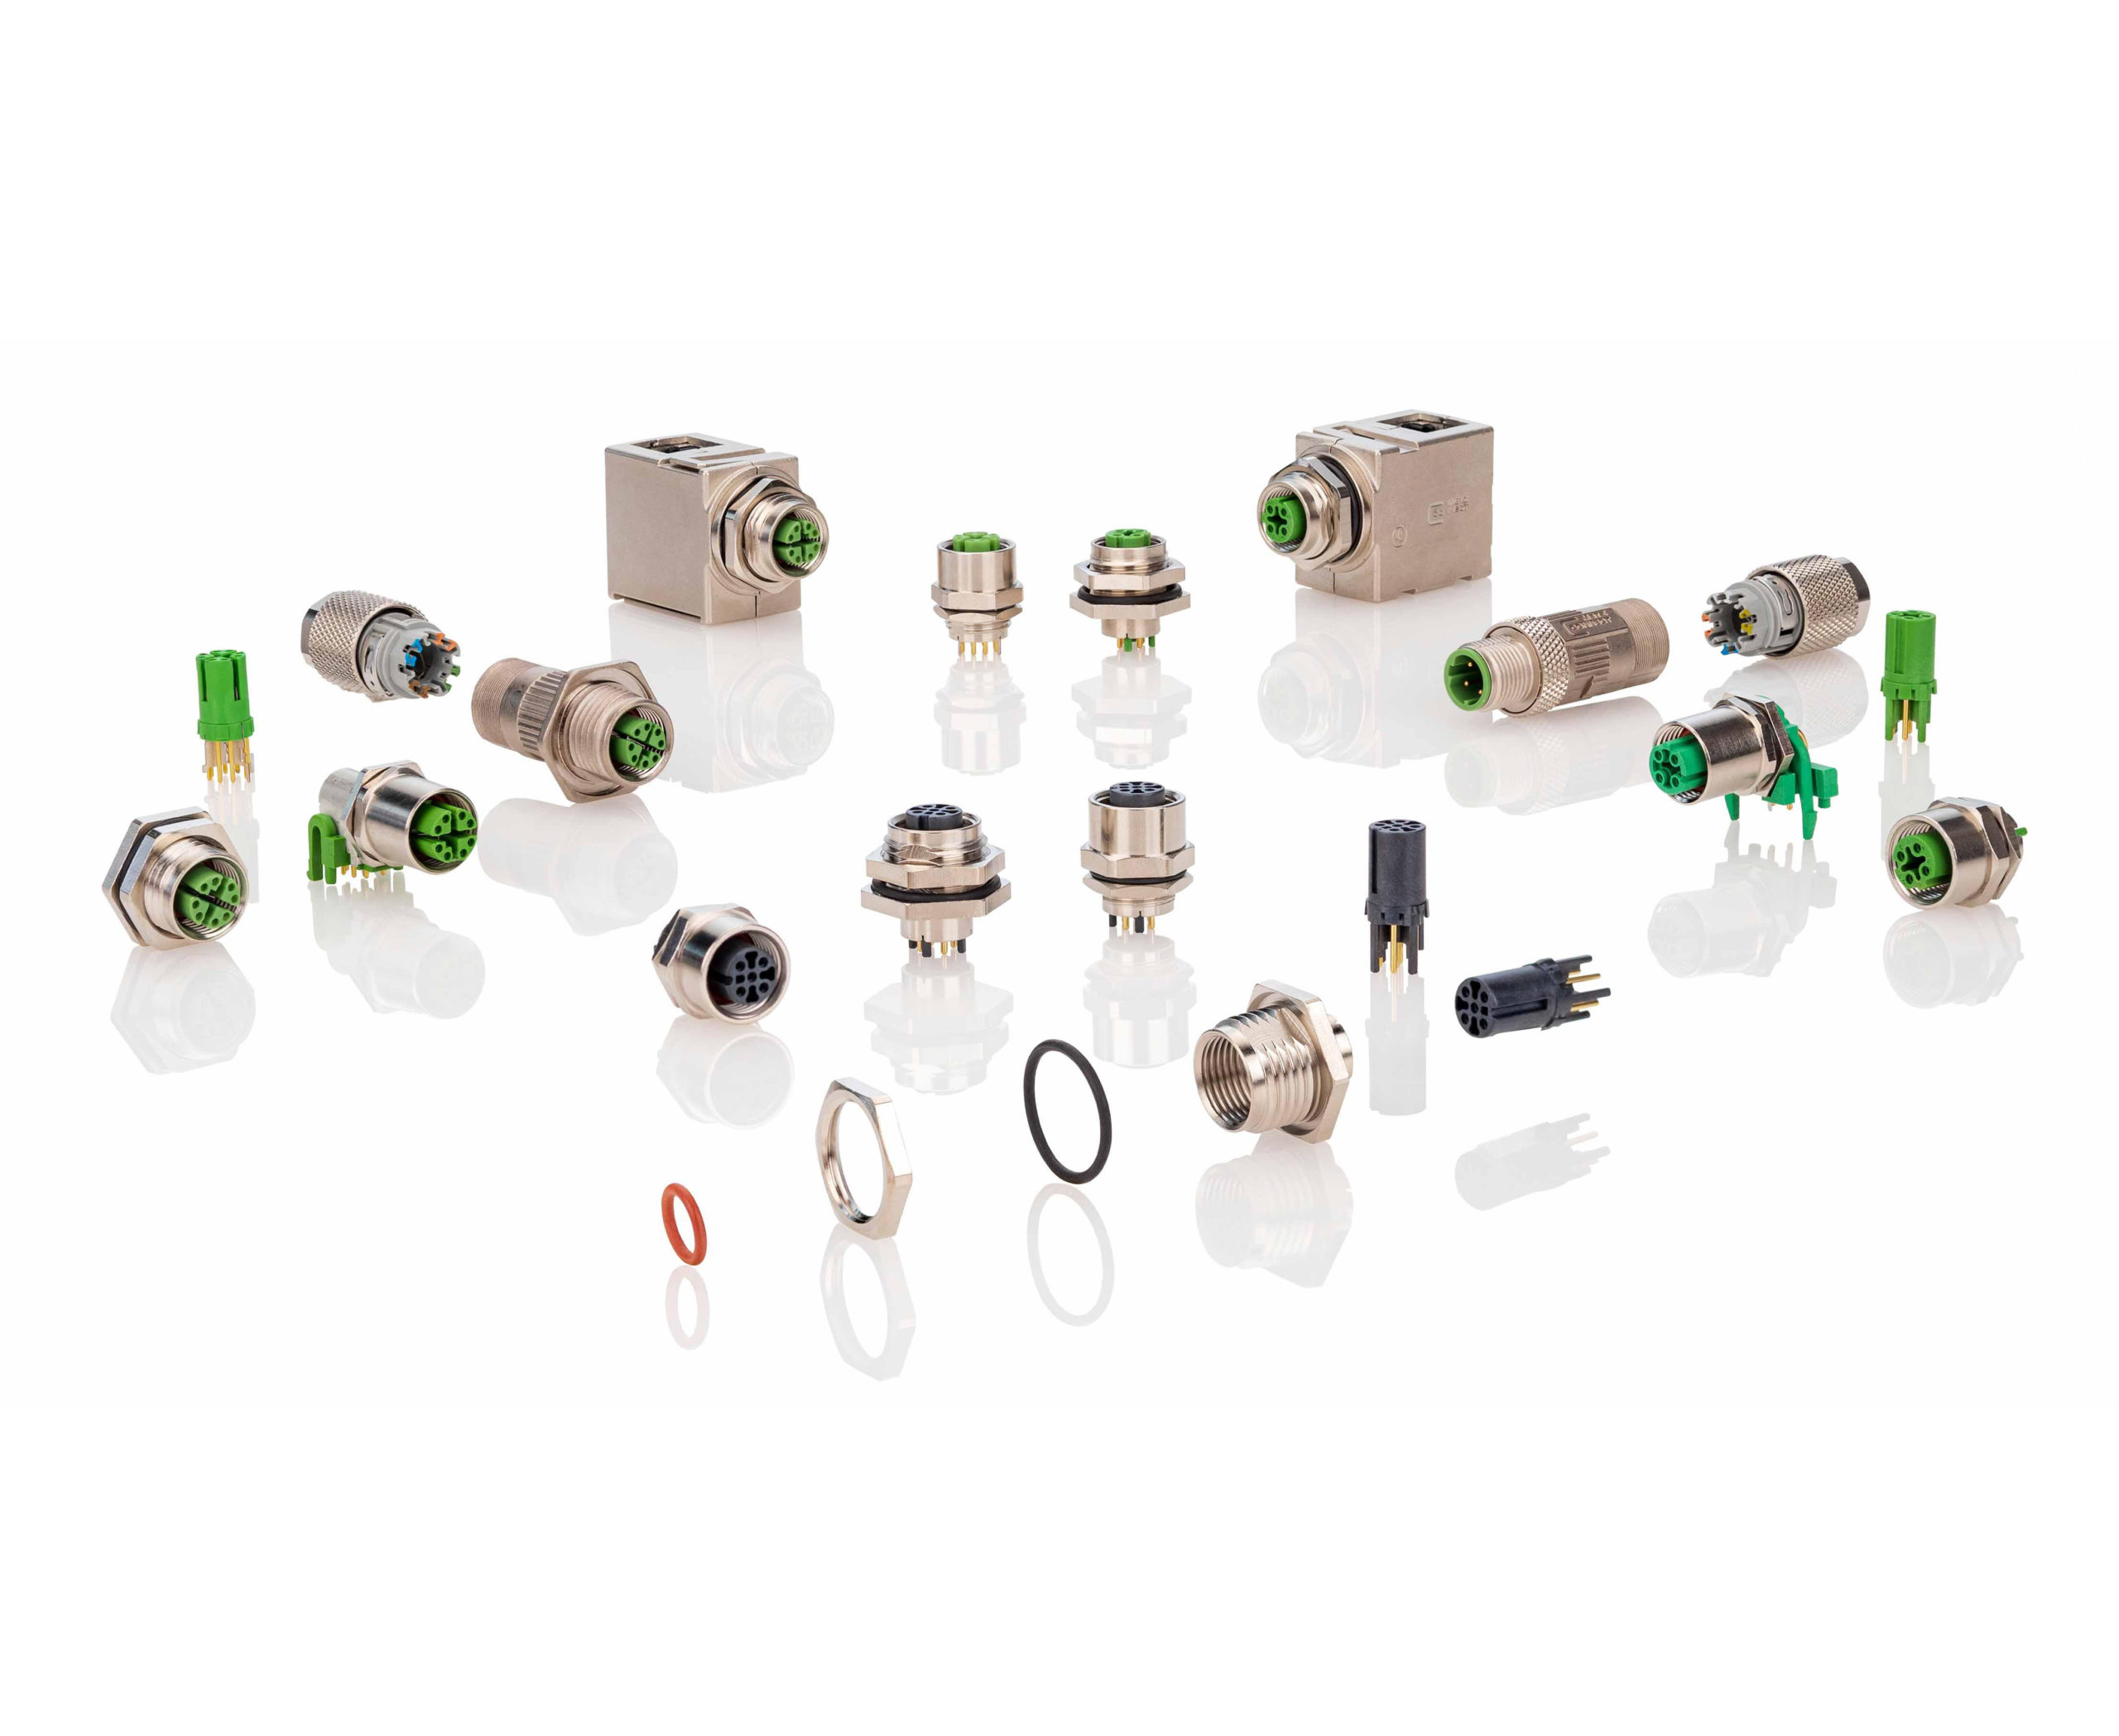 METZ CONNECT M12 connector family expansion